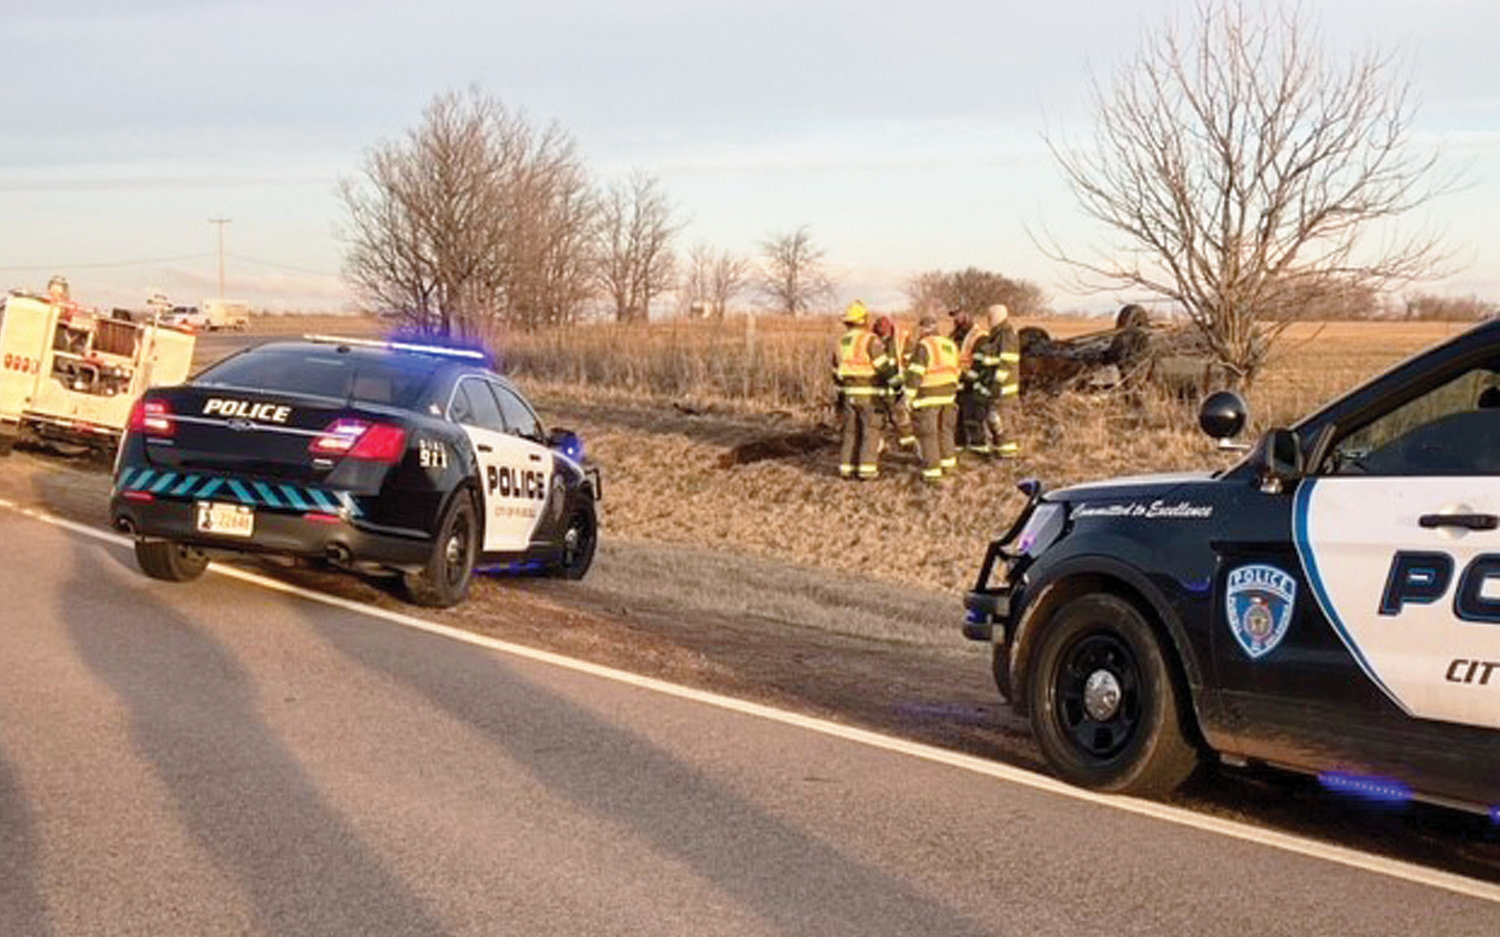 Purcell Police officer John Idlett was about to call off pursuit of this vehicle when it attempted to exit I-35 at the Ladd Road exit at a very high rate of speed. The vehicle crossed over the roadway and flipped into the pasture landing on its top.